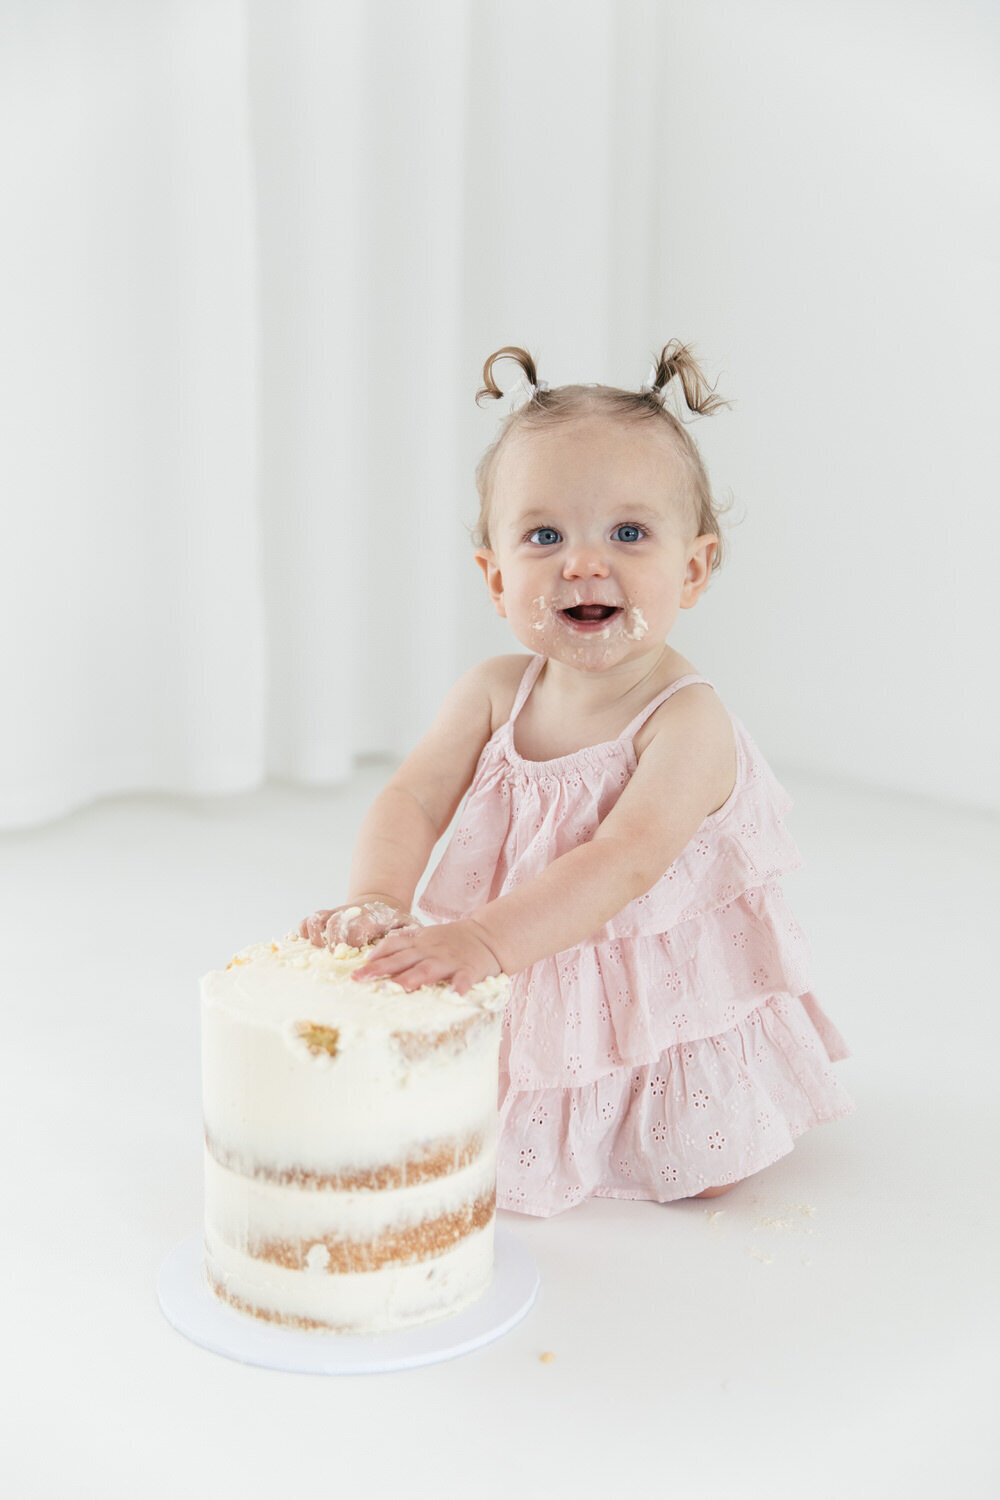 One year old girl in pink dress leans against her birthday cake looks at the camera with a smile